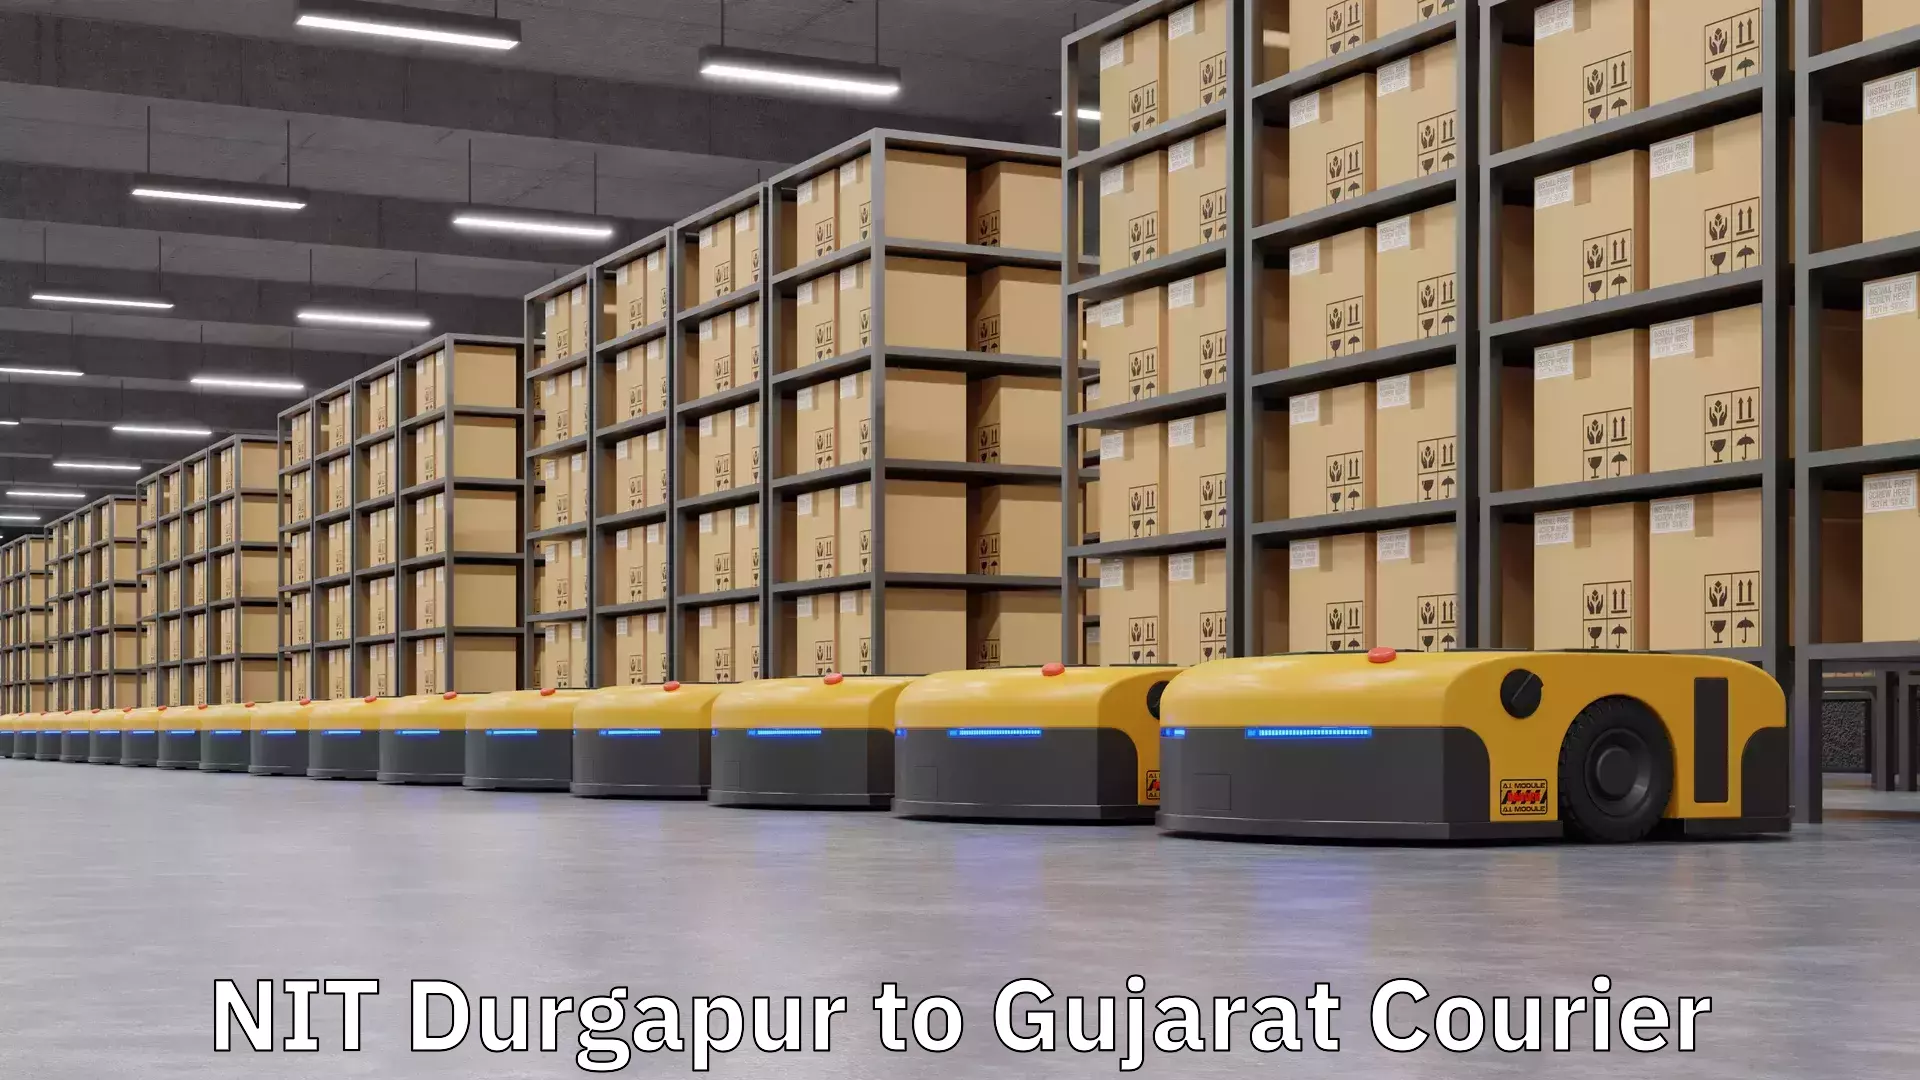 Efficient courier operations in NIT Durgapur to Gujarat